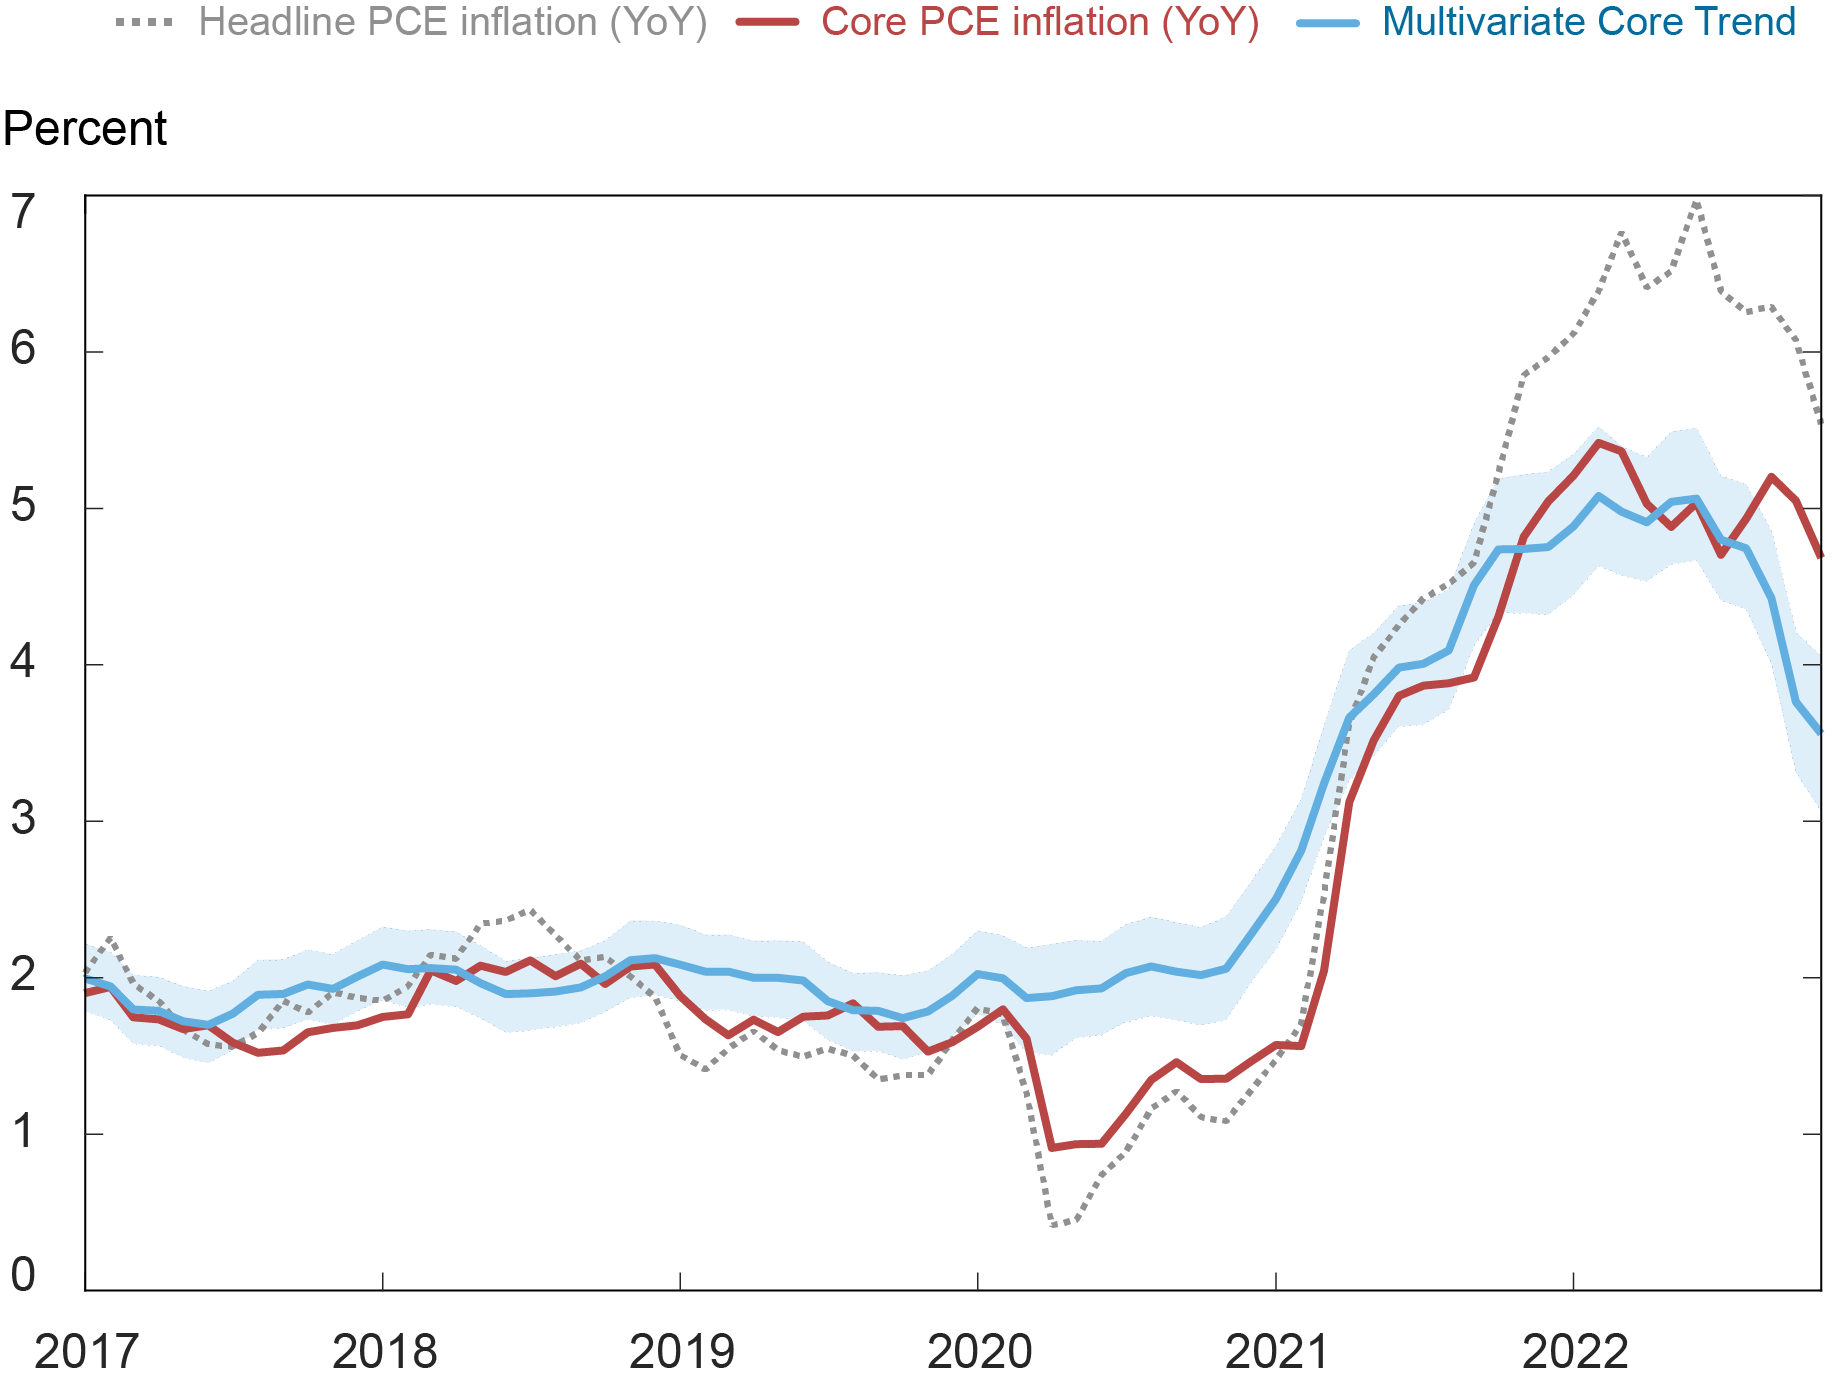 Liberty Street Economics chart showing the Multivariate Core Trend (MCT) estimates alongside twelve-month headline and core PCE inflation. The MCT remained stable at 5 percent from January to July 2022 and then declined to 4.7 in August, 4.5 in September and 3.9 in October. The trend stood at 3.7 percent through November, with a 68 percent probability interval of (3.1, 4.3).